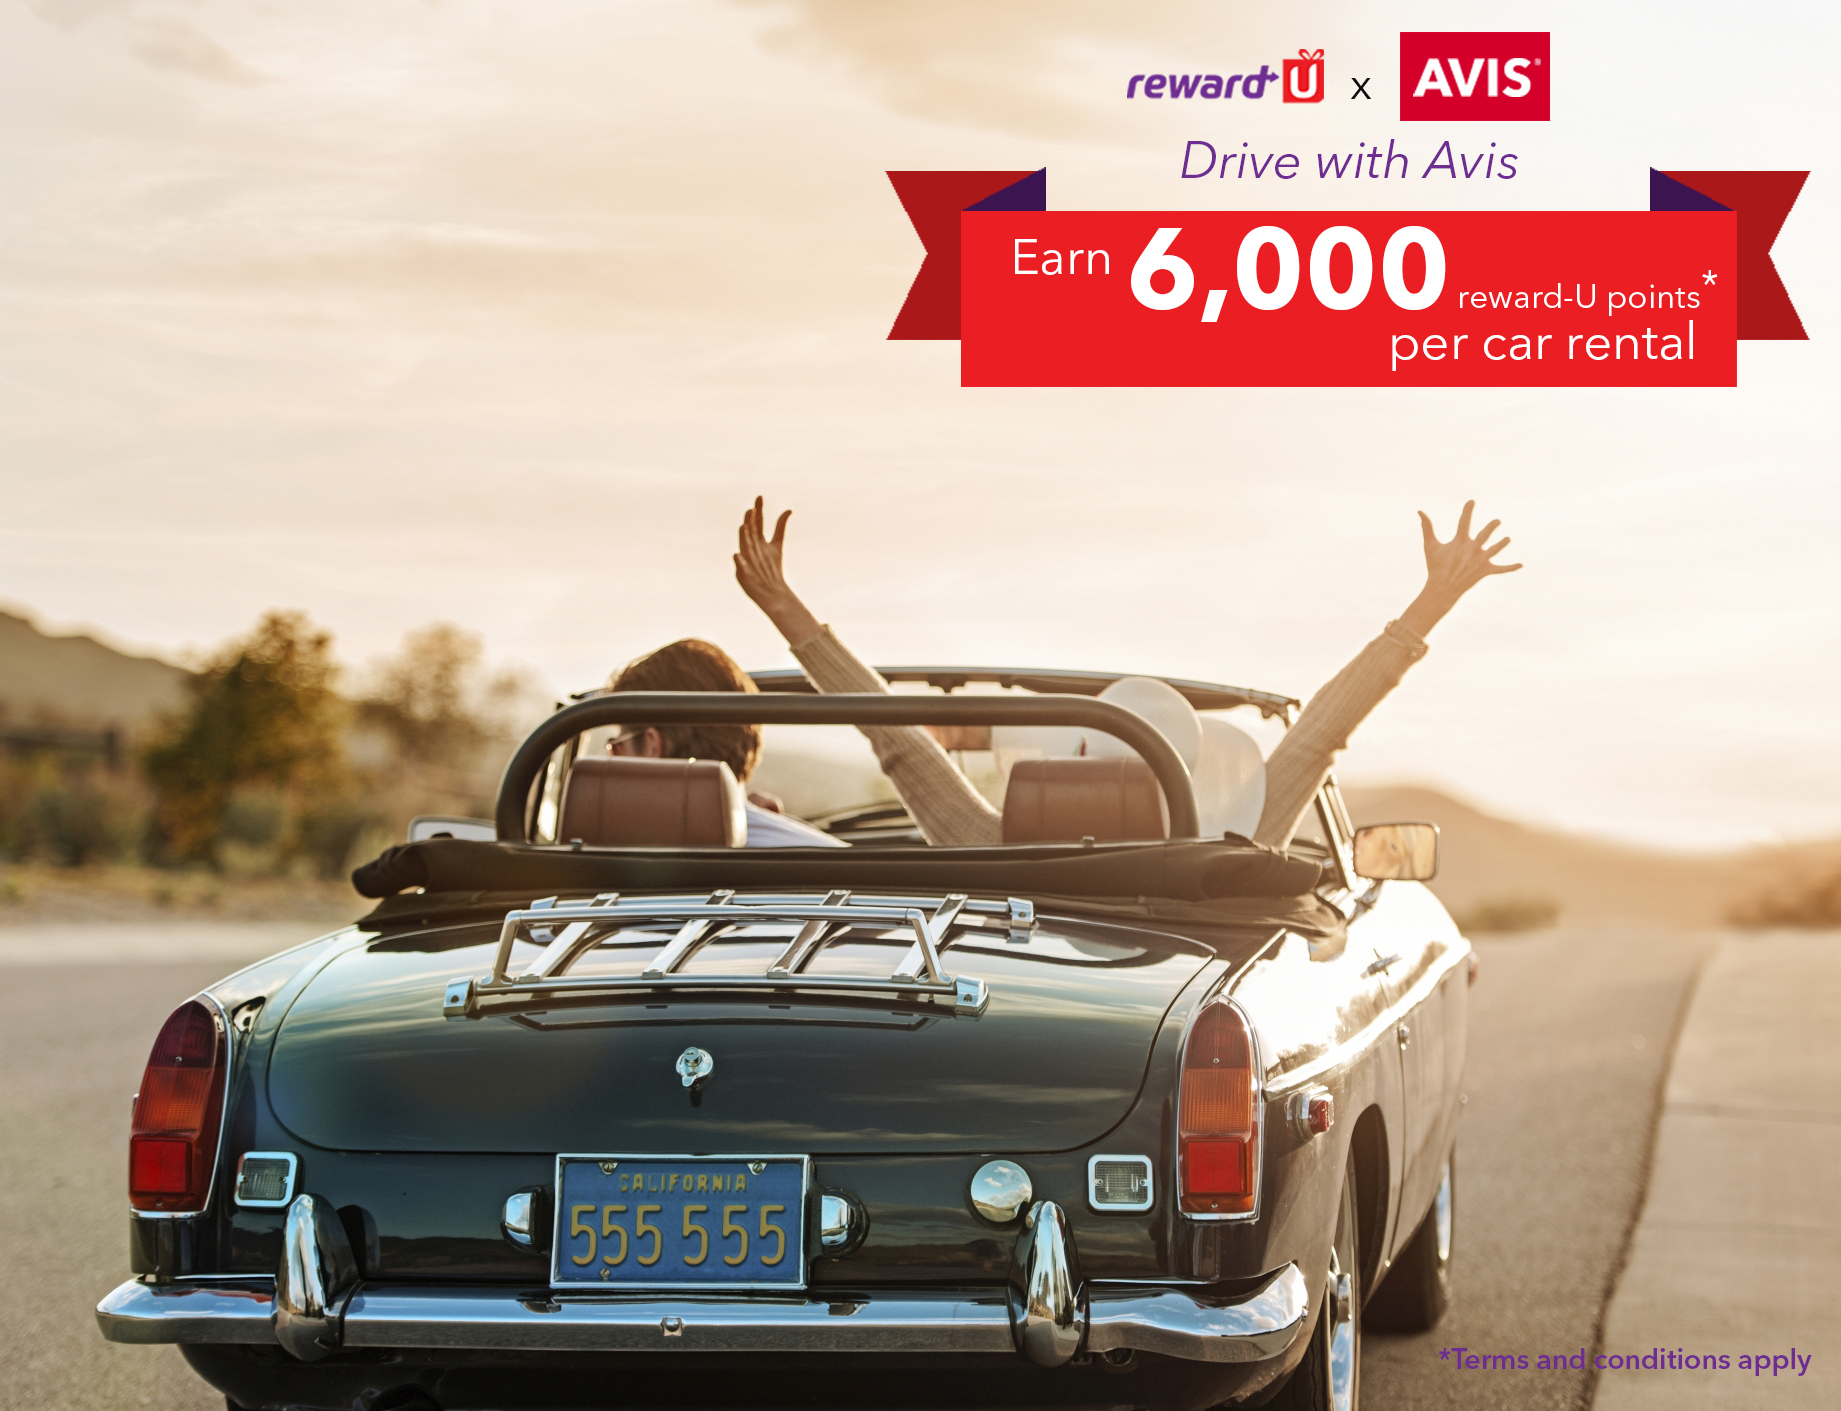 Drive with AVIS & Earn up to 6,000 rewardU Points